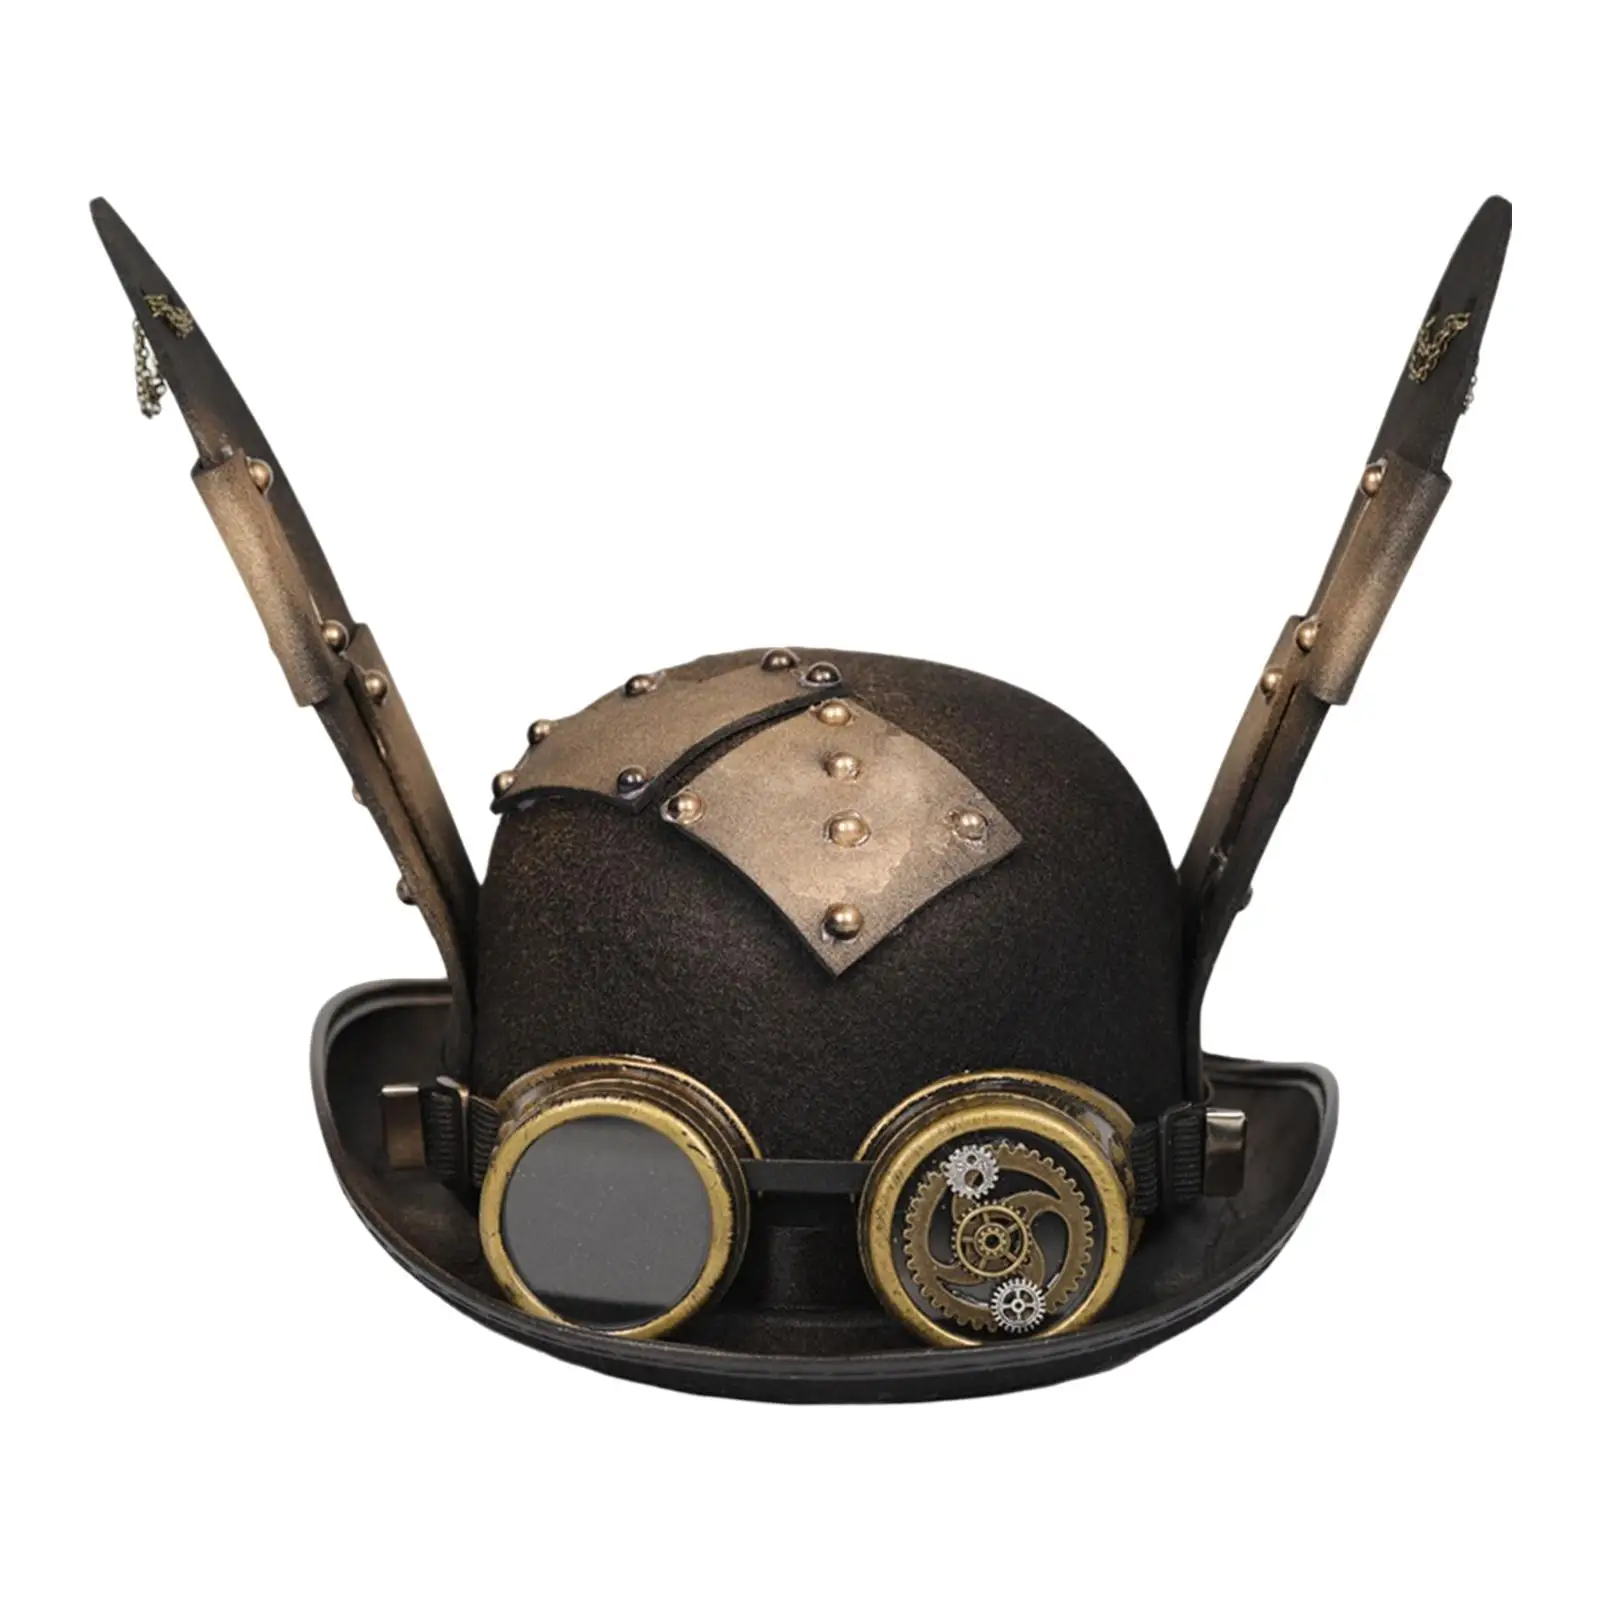 Halloween Steampunk Hat with Goggles Black Top Hat Masquerade Costume Party